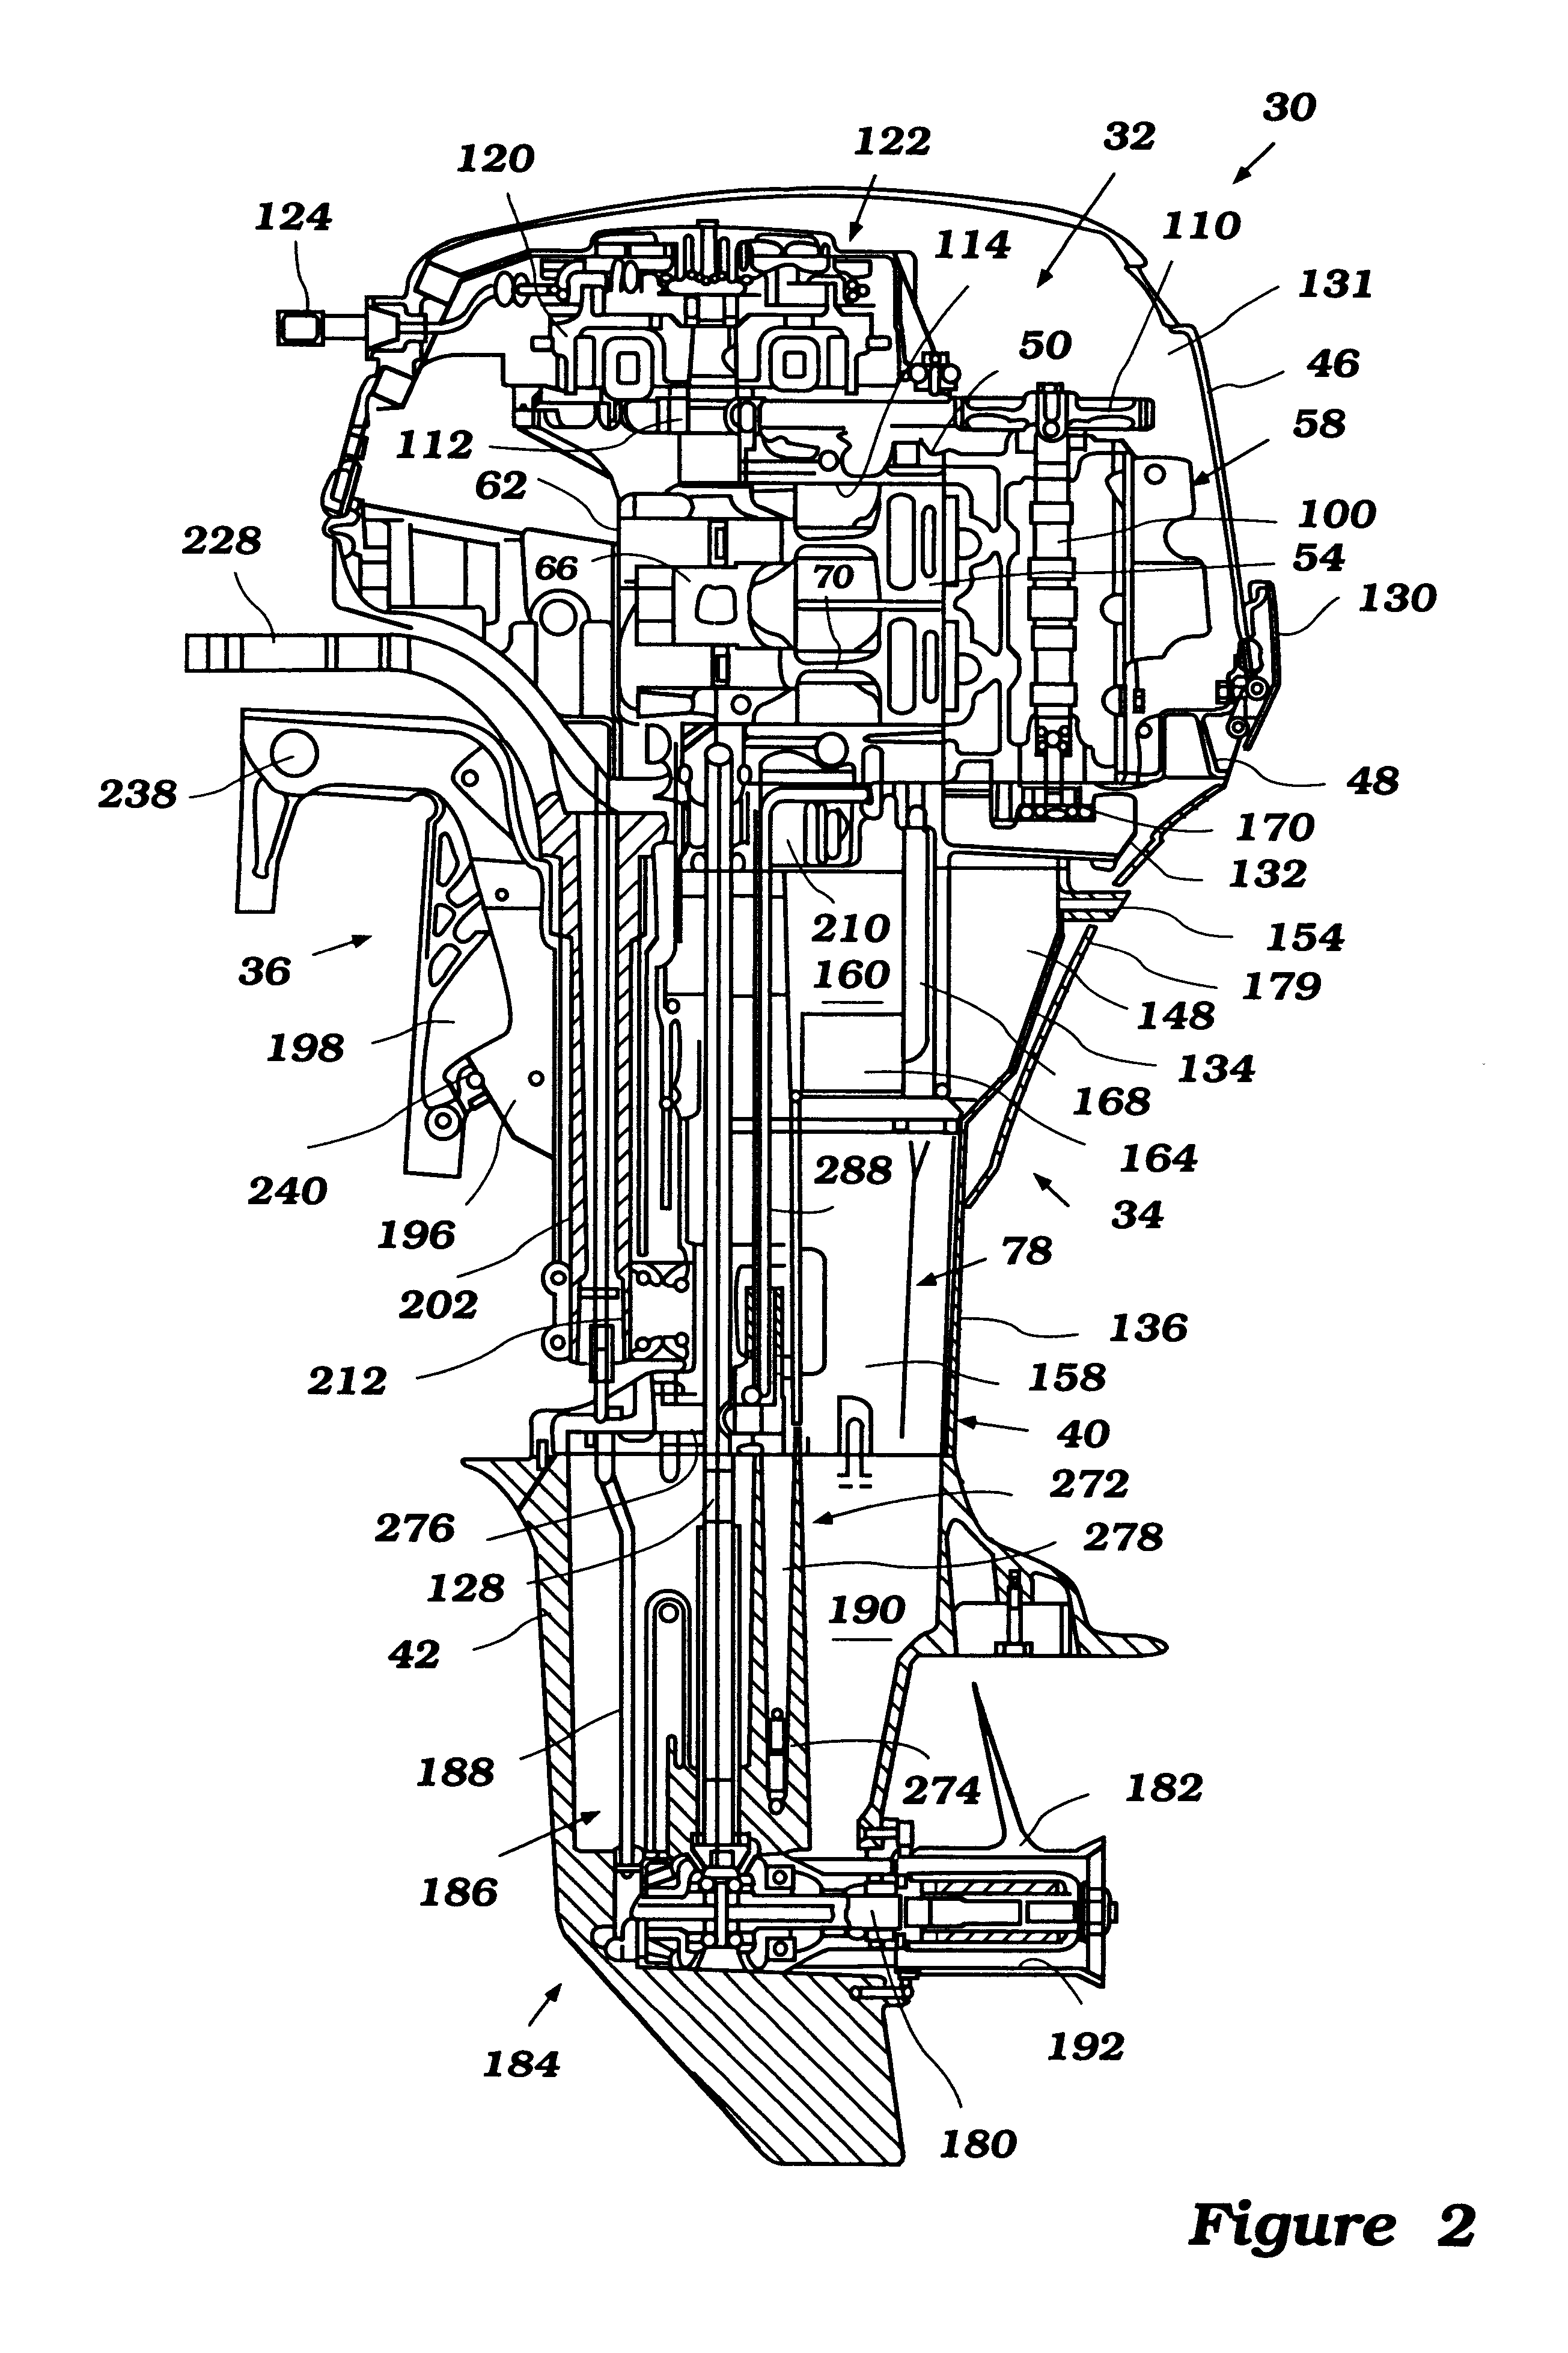 Engine layout for outboard motor